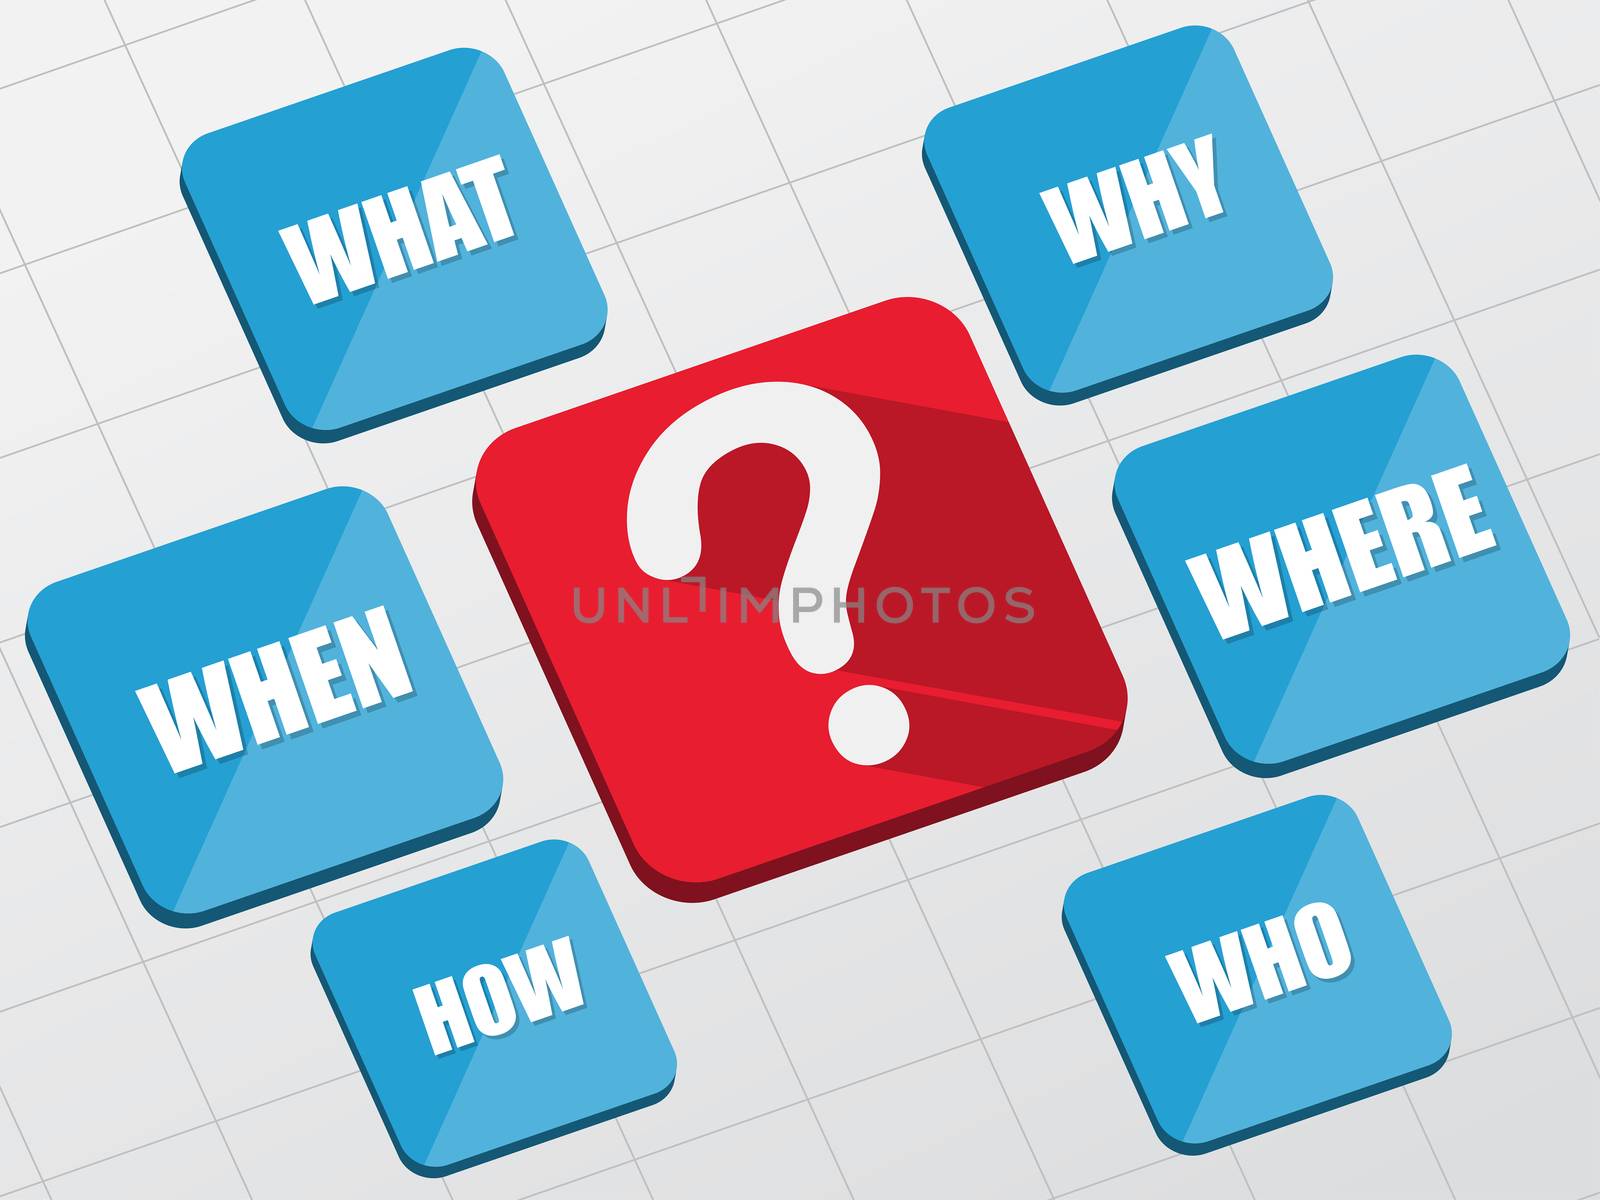 question sign and question words - white text and symbol in red and blue flat design blocks, business concept